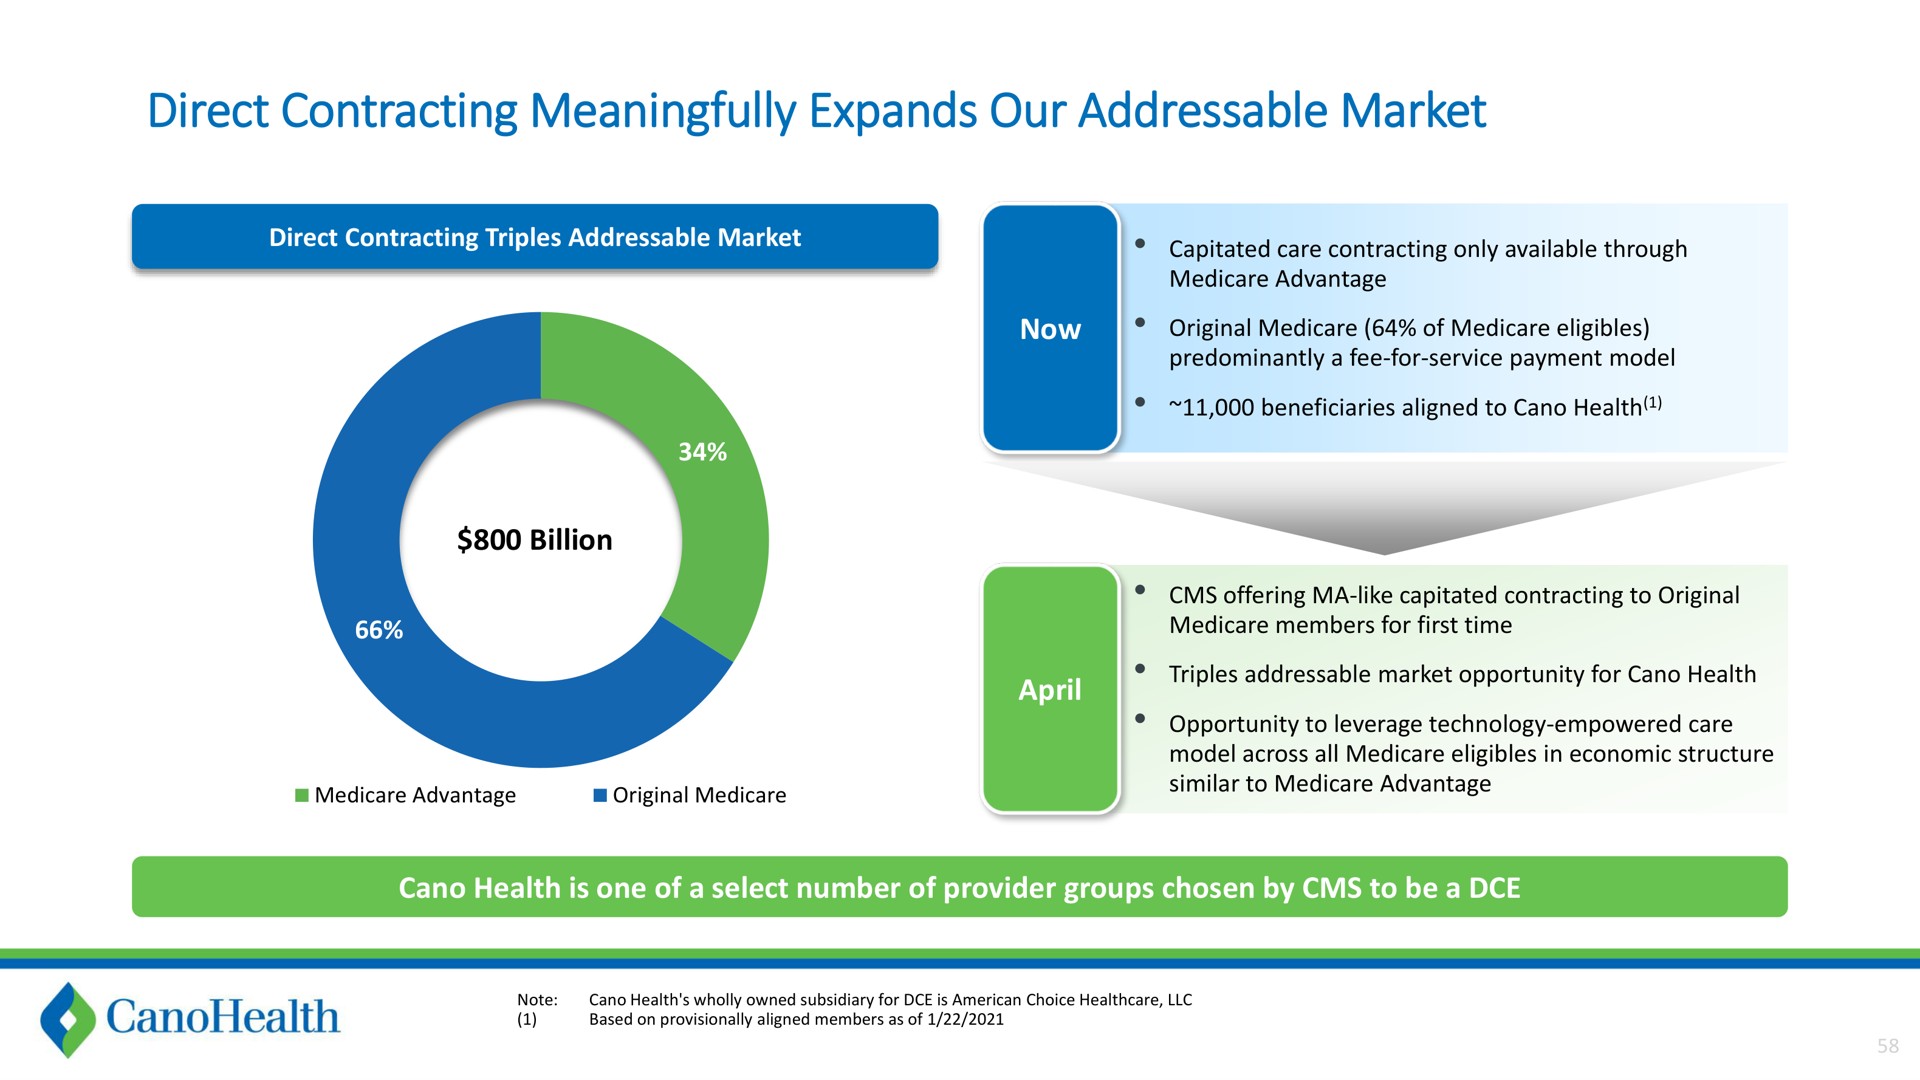 direct contracting meaningfully expands our market billion | Cano Health